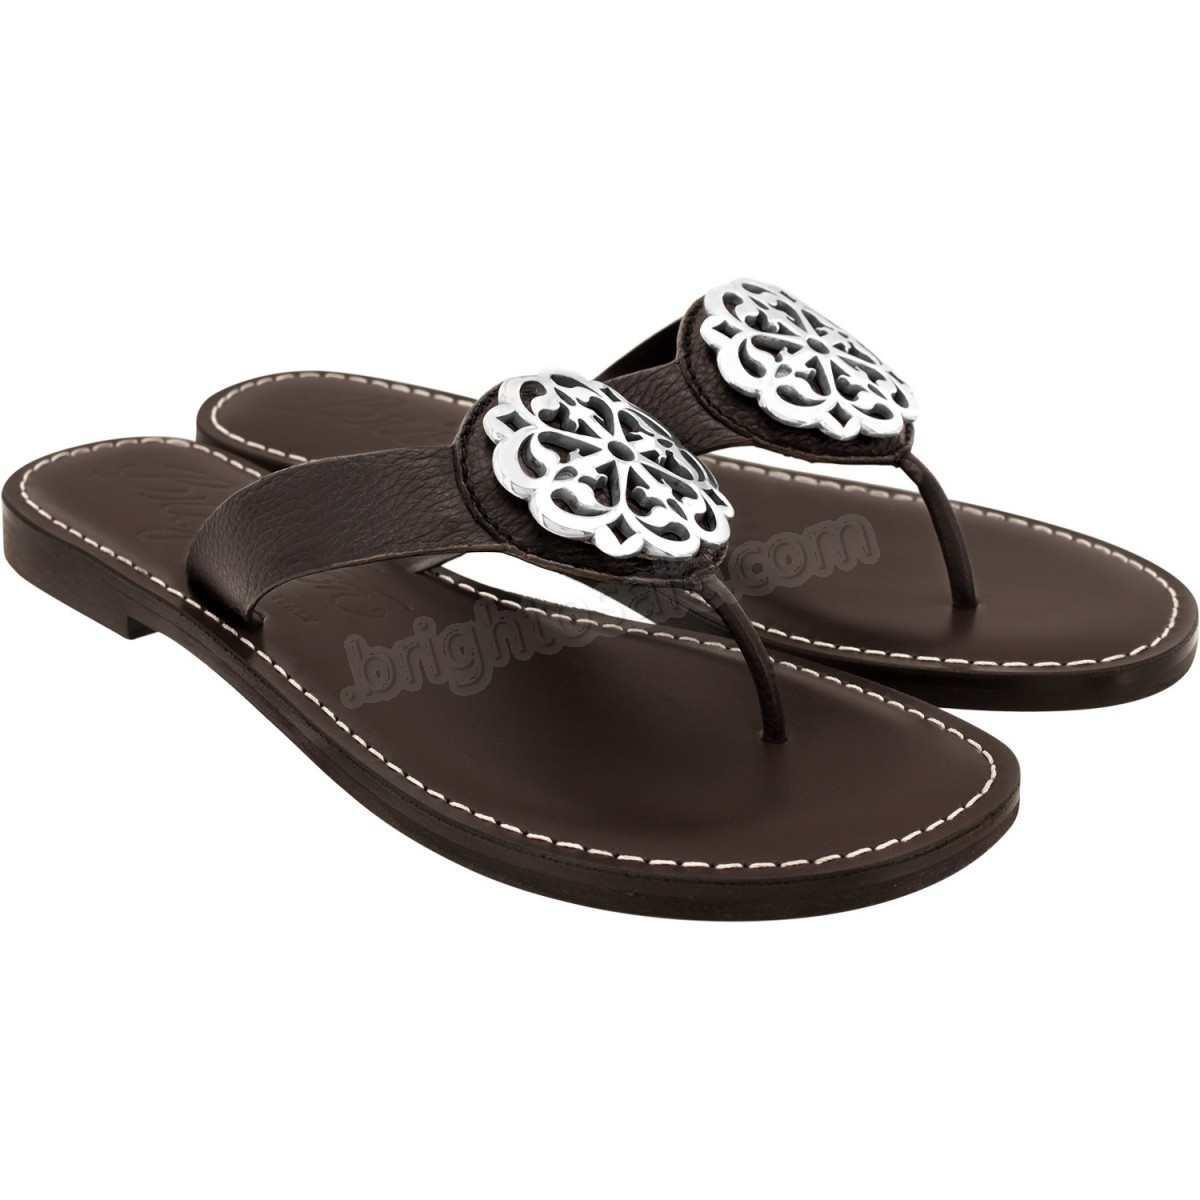 Brighton Collectibles & Online Discount Twine Woven Sandals - -6